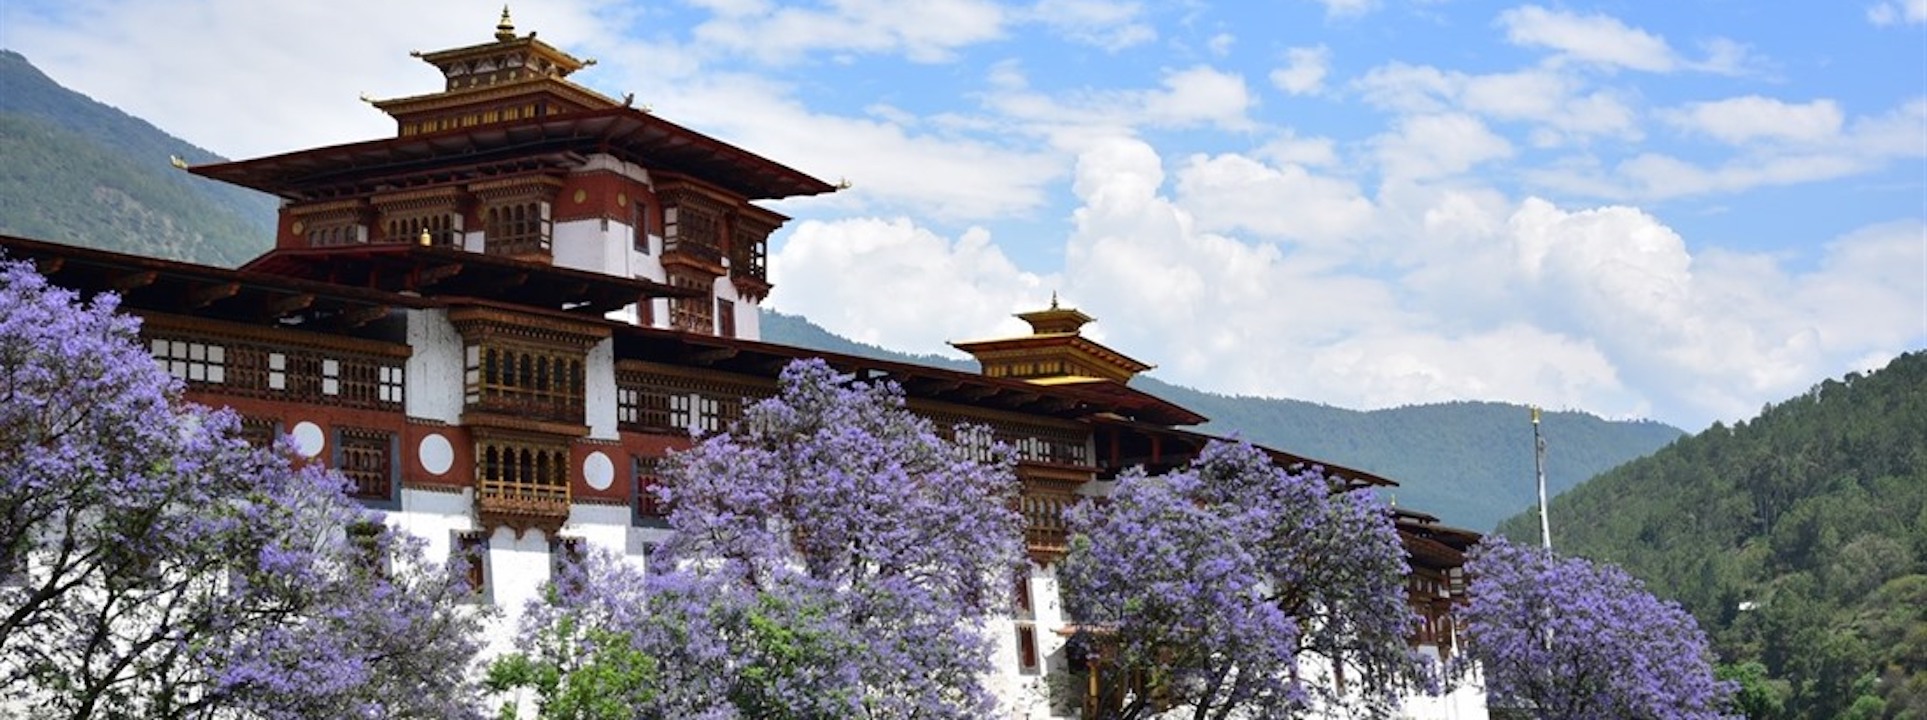 4 Day Tast of Bhutan Deluxe Private tour (economy class flight from Bangkok included) Shoulder Season